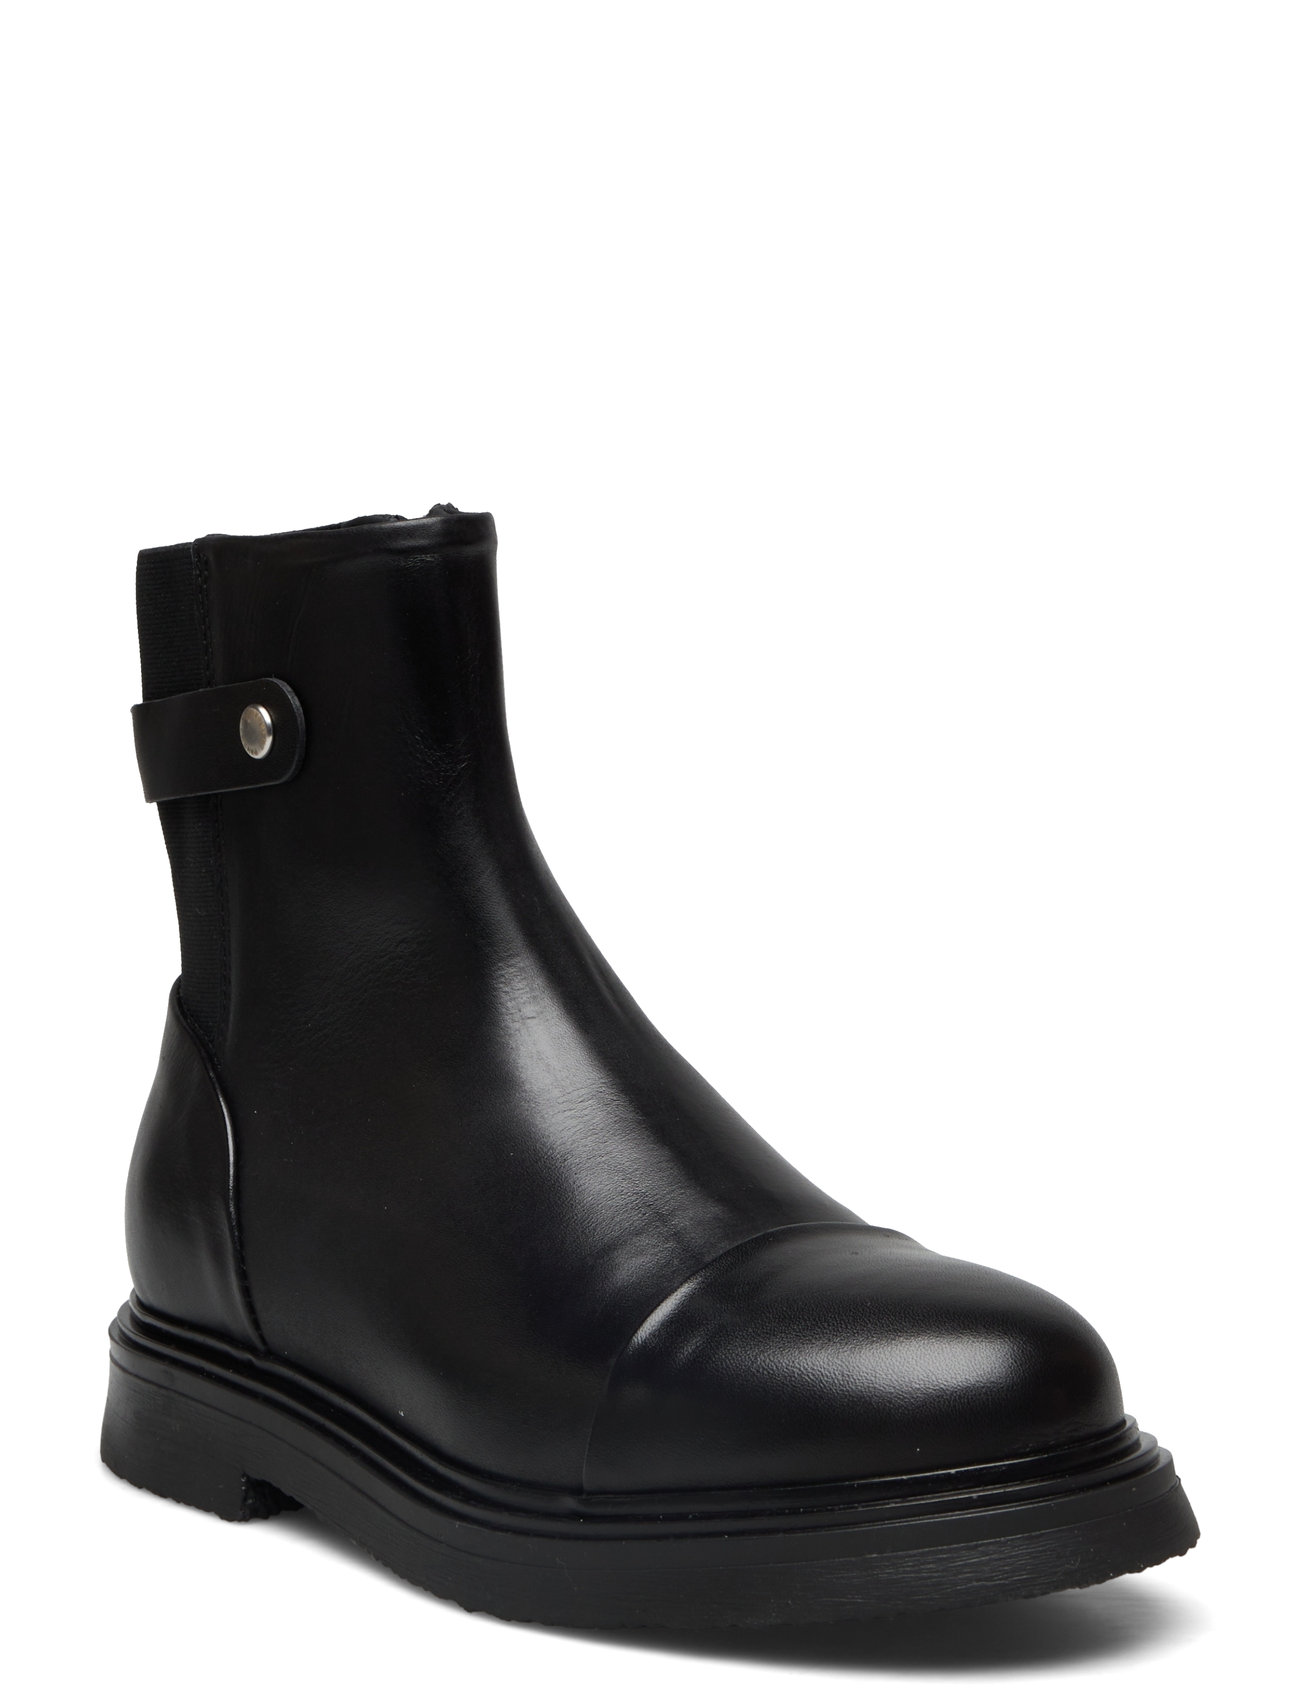 Brooke Shoes Boots Ankle Boots Ankle Boots Flat Heel Black Pavement